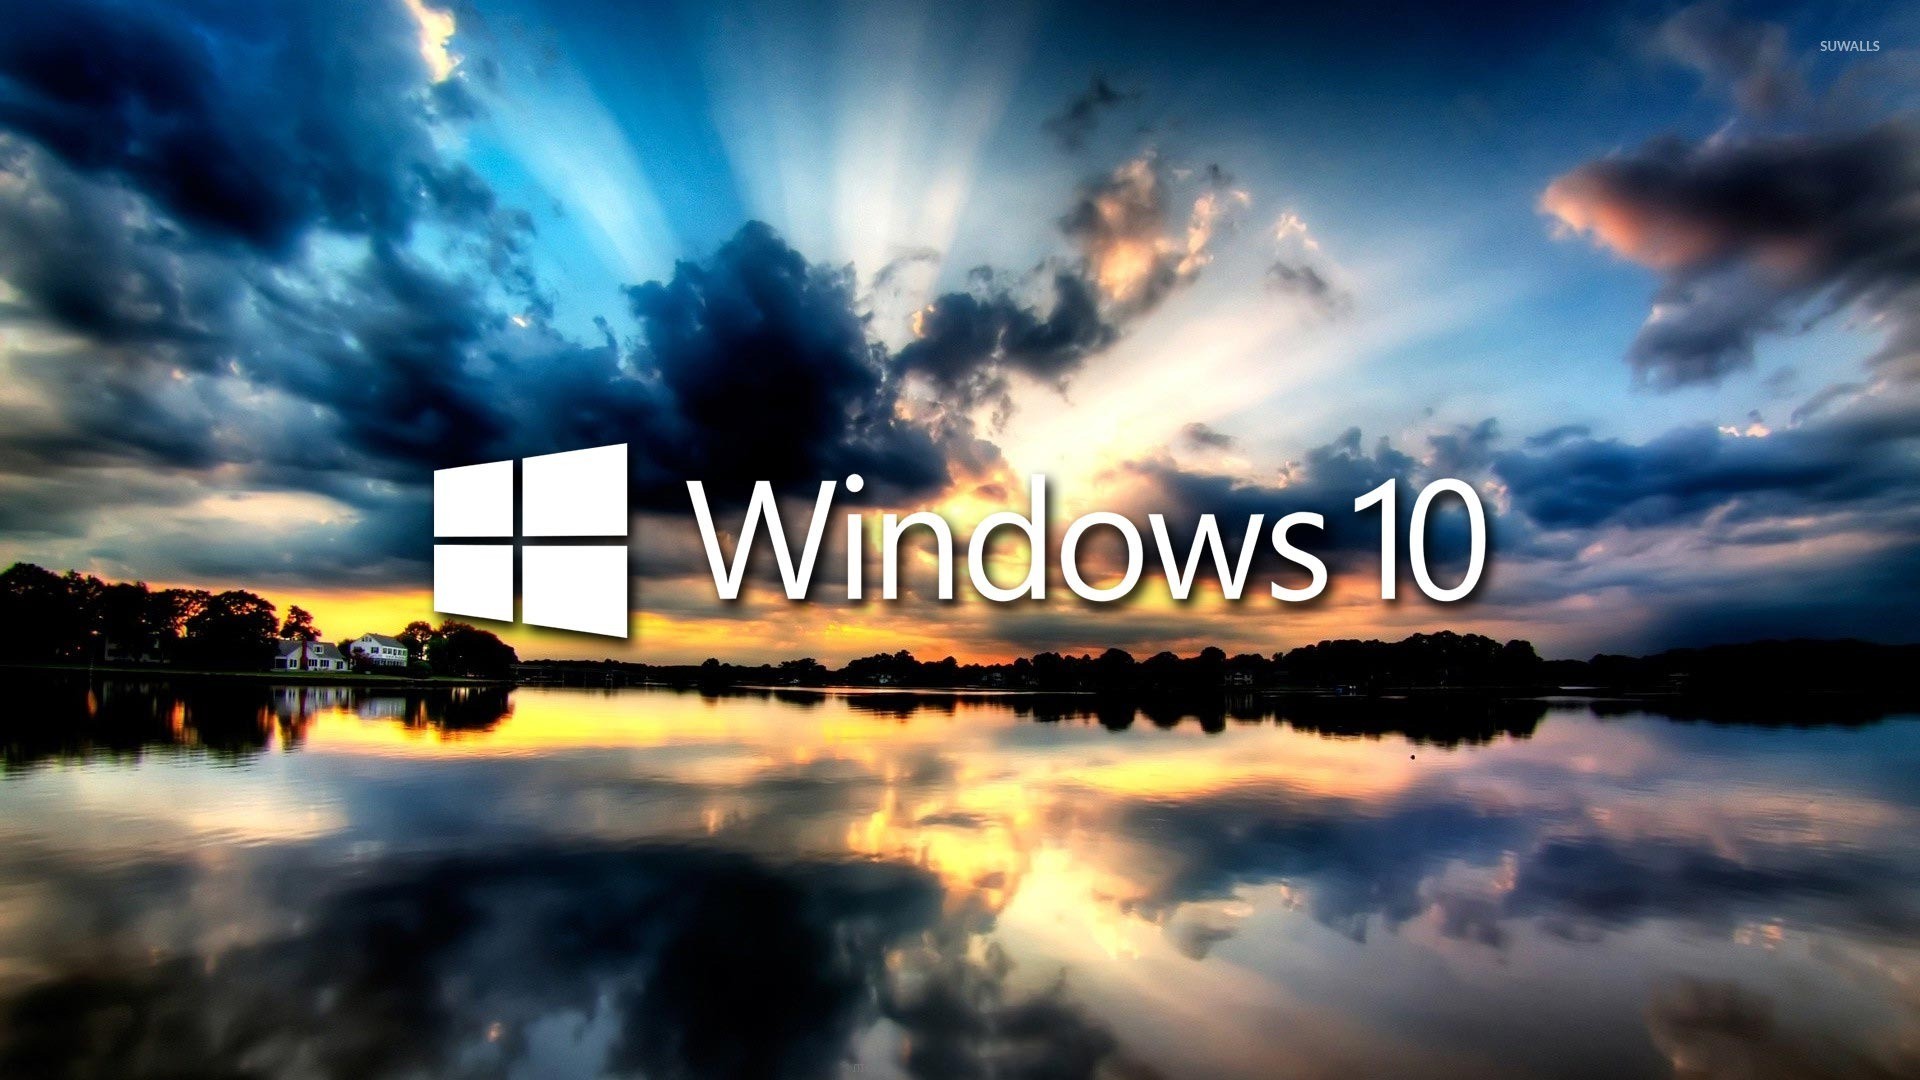 1920x1080 Windows 10 on the reflected clouds wallpaper